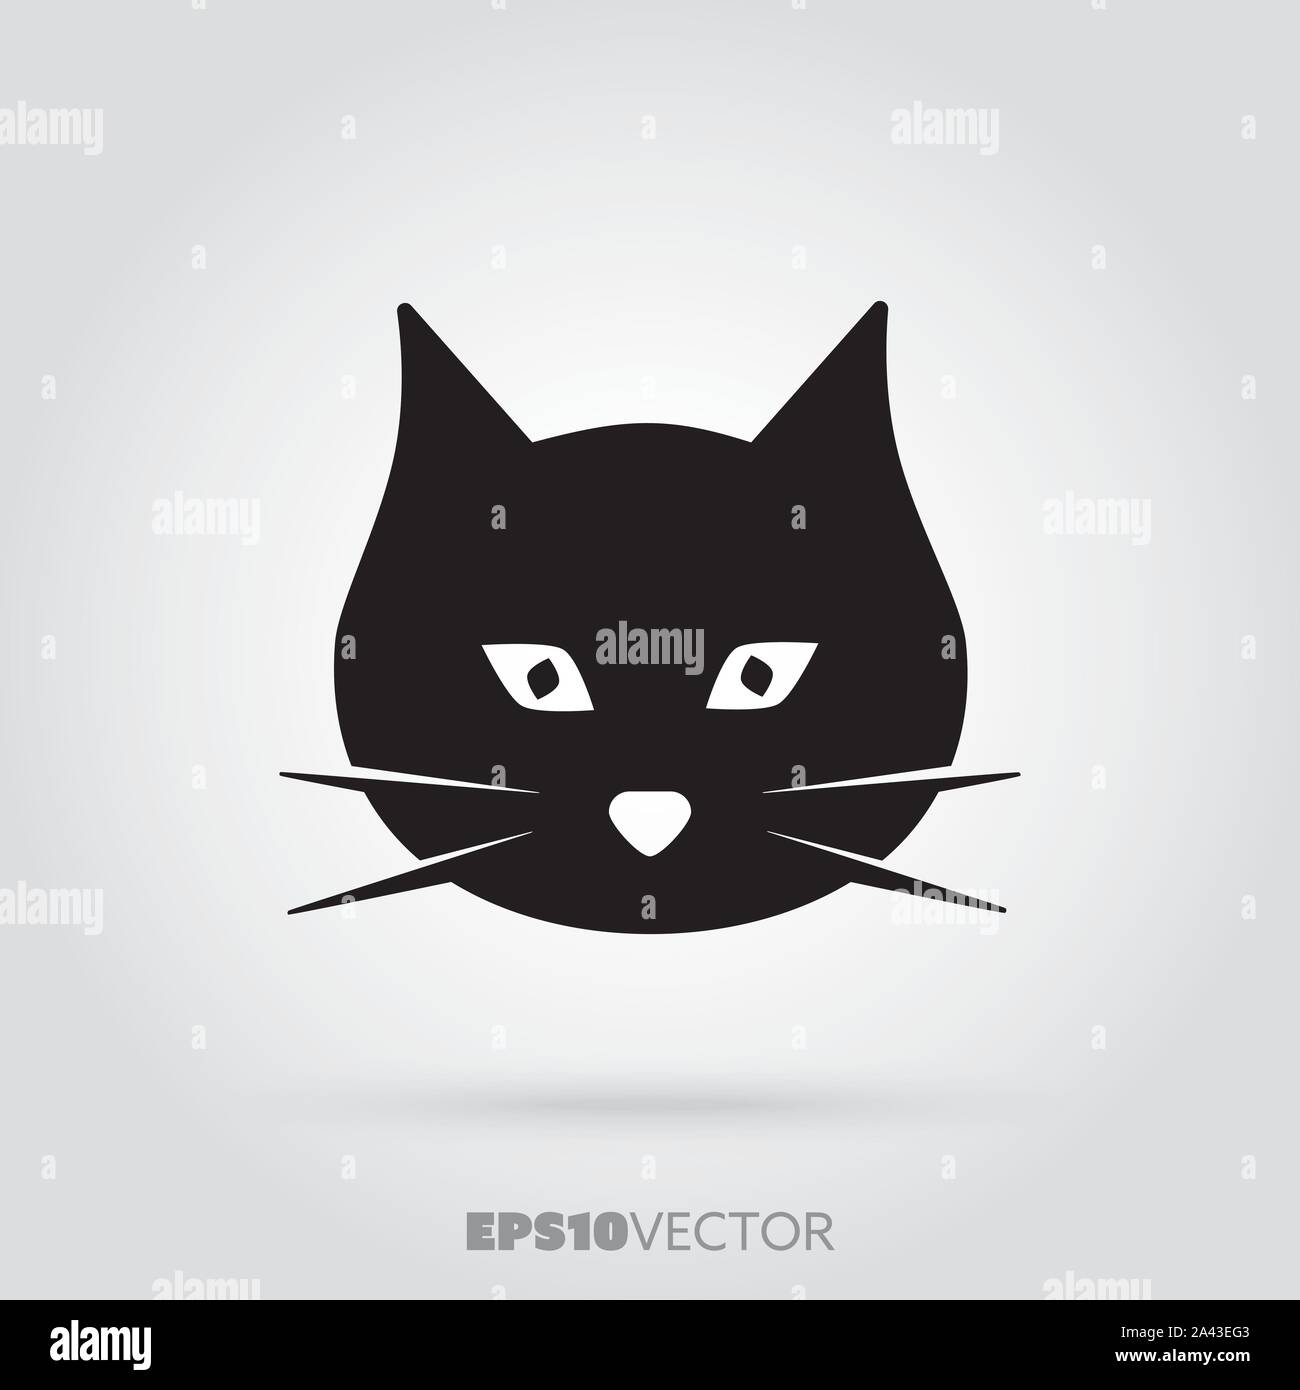 25 Cats Glyph Icon Pack. Vector Illustration Stock Vector - Illustration of  logo, graphic: 271579391